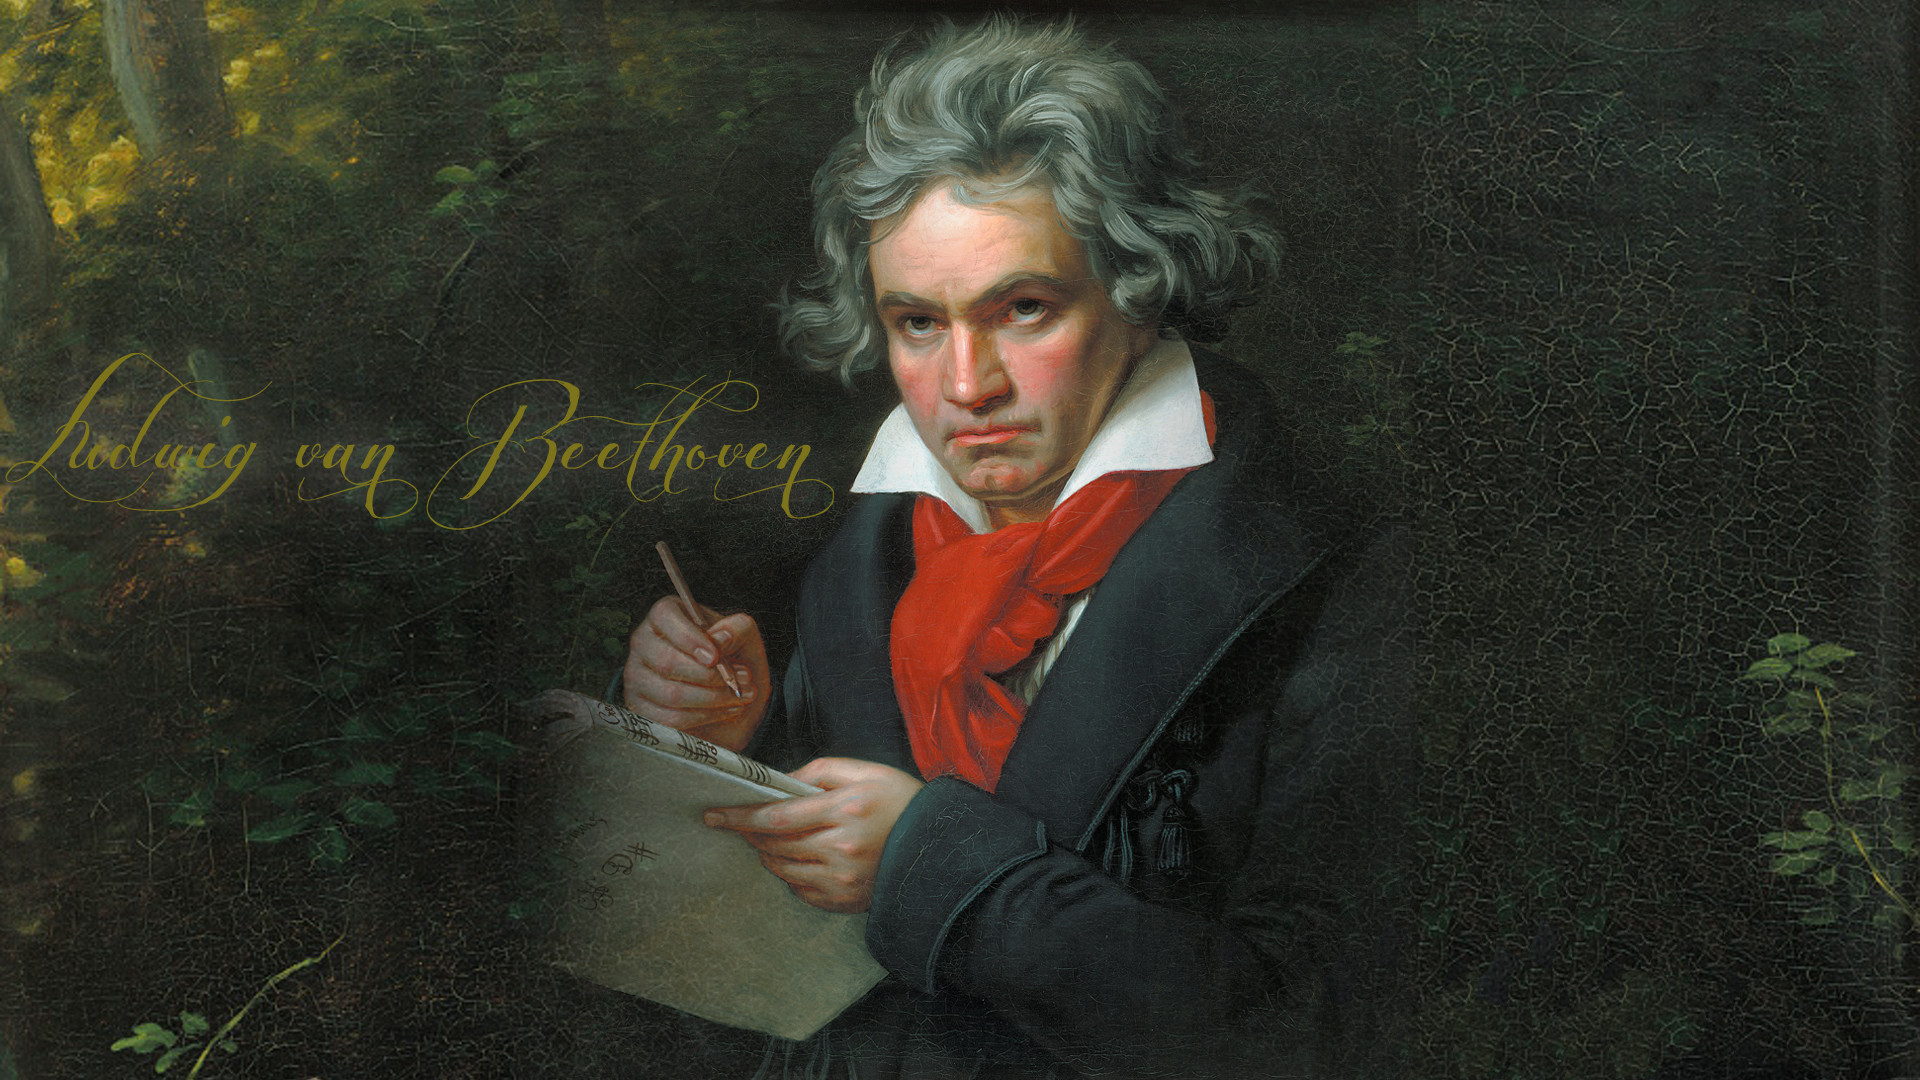 Beethoven: The Musical Genius